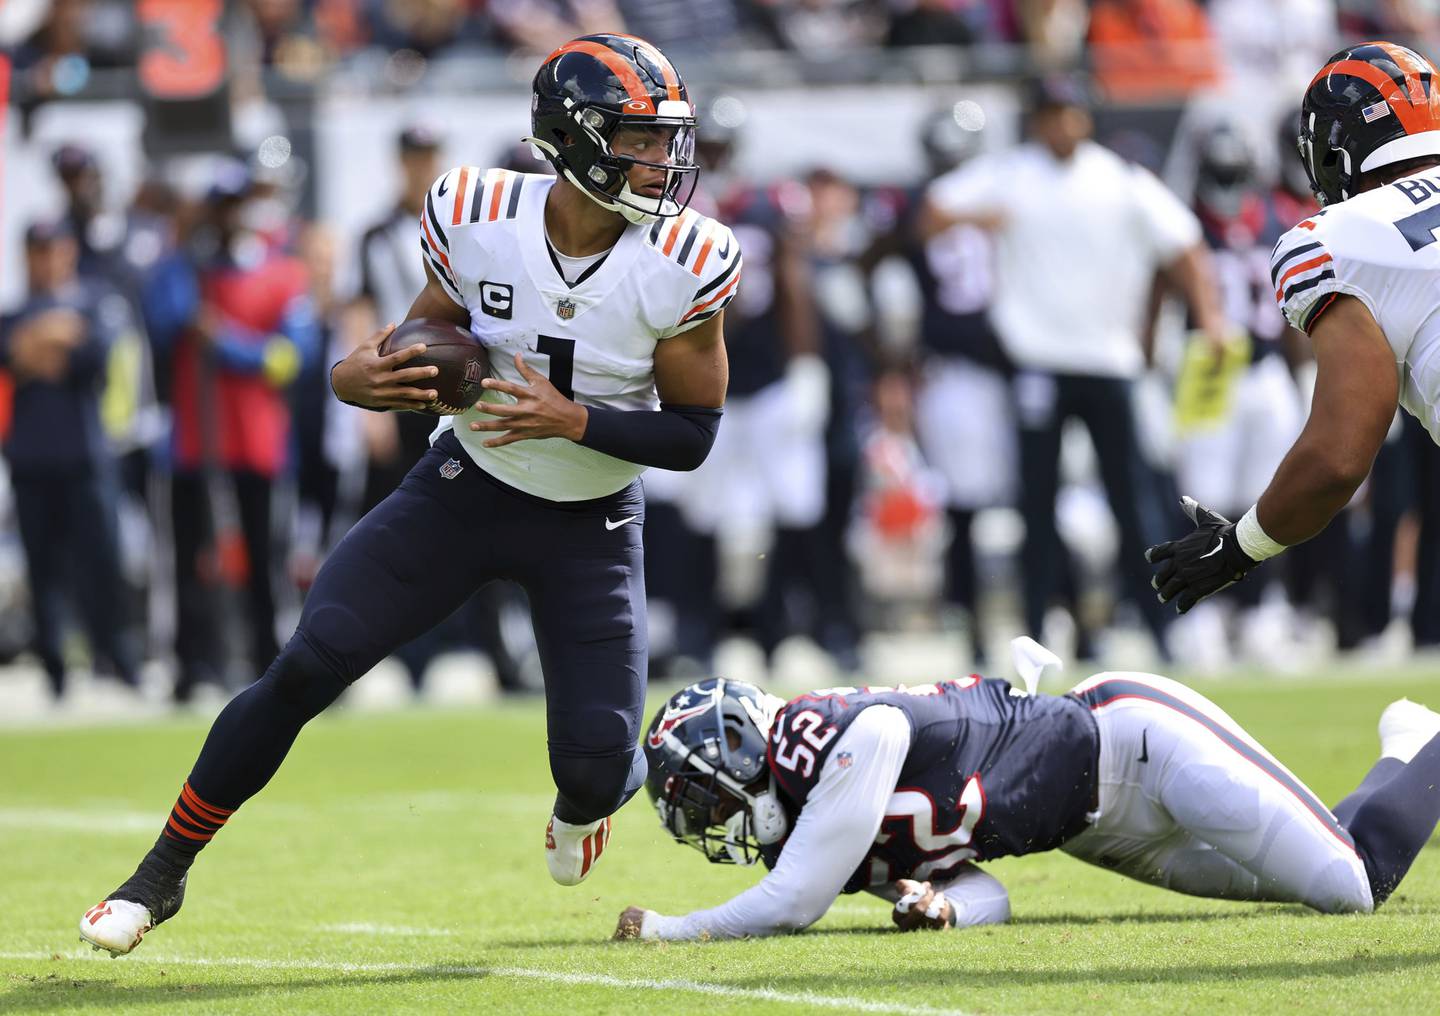 Bears quarterback Justin Fields scrambles out of the pocket before gaining a first down on a run in the first quarter against the Texans at Soldier Field on Sept. 25, 2022.